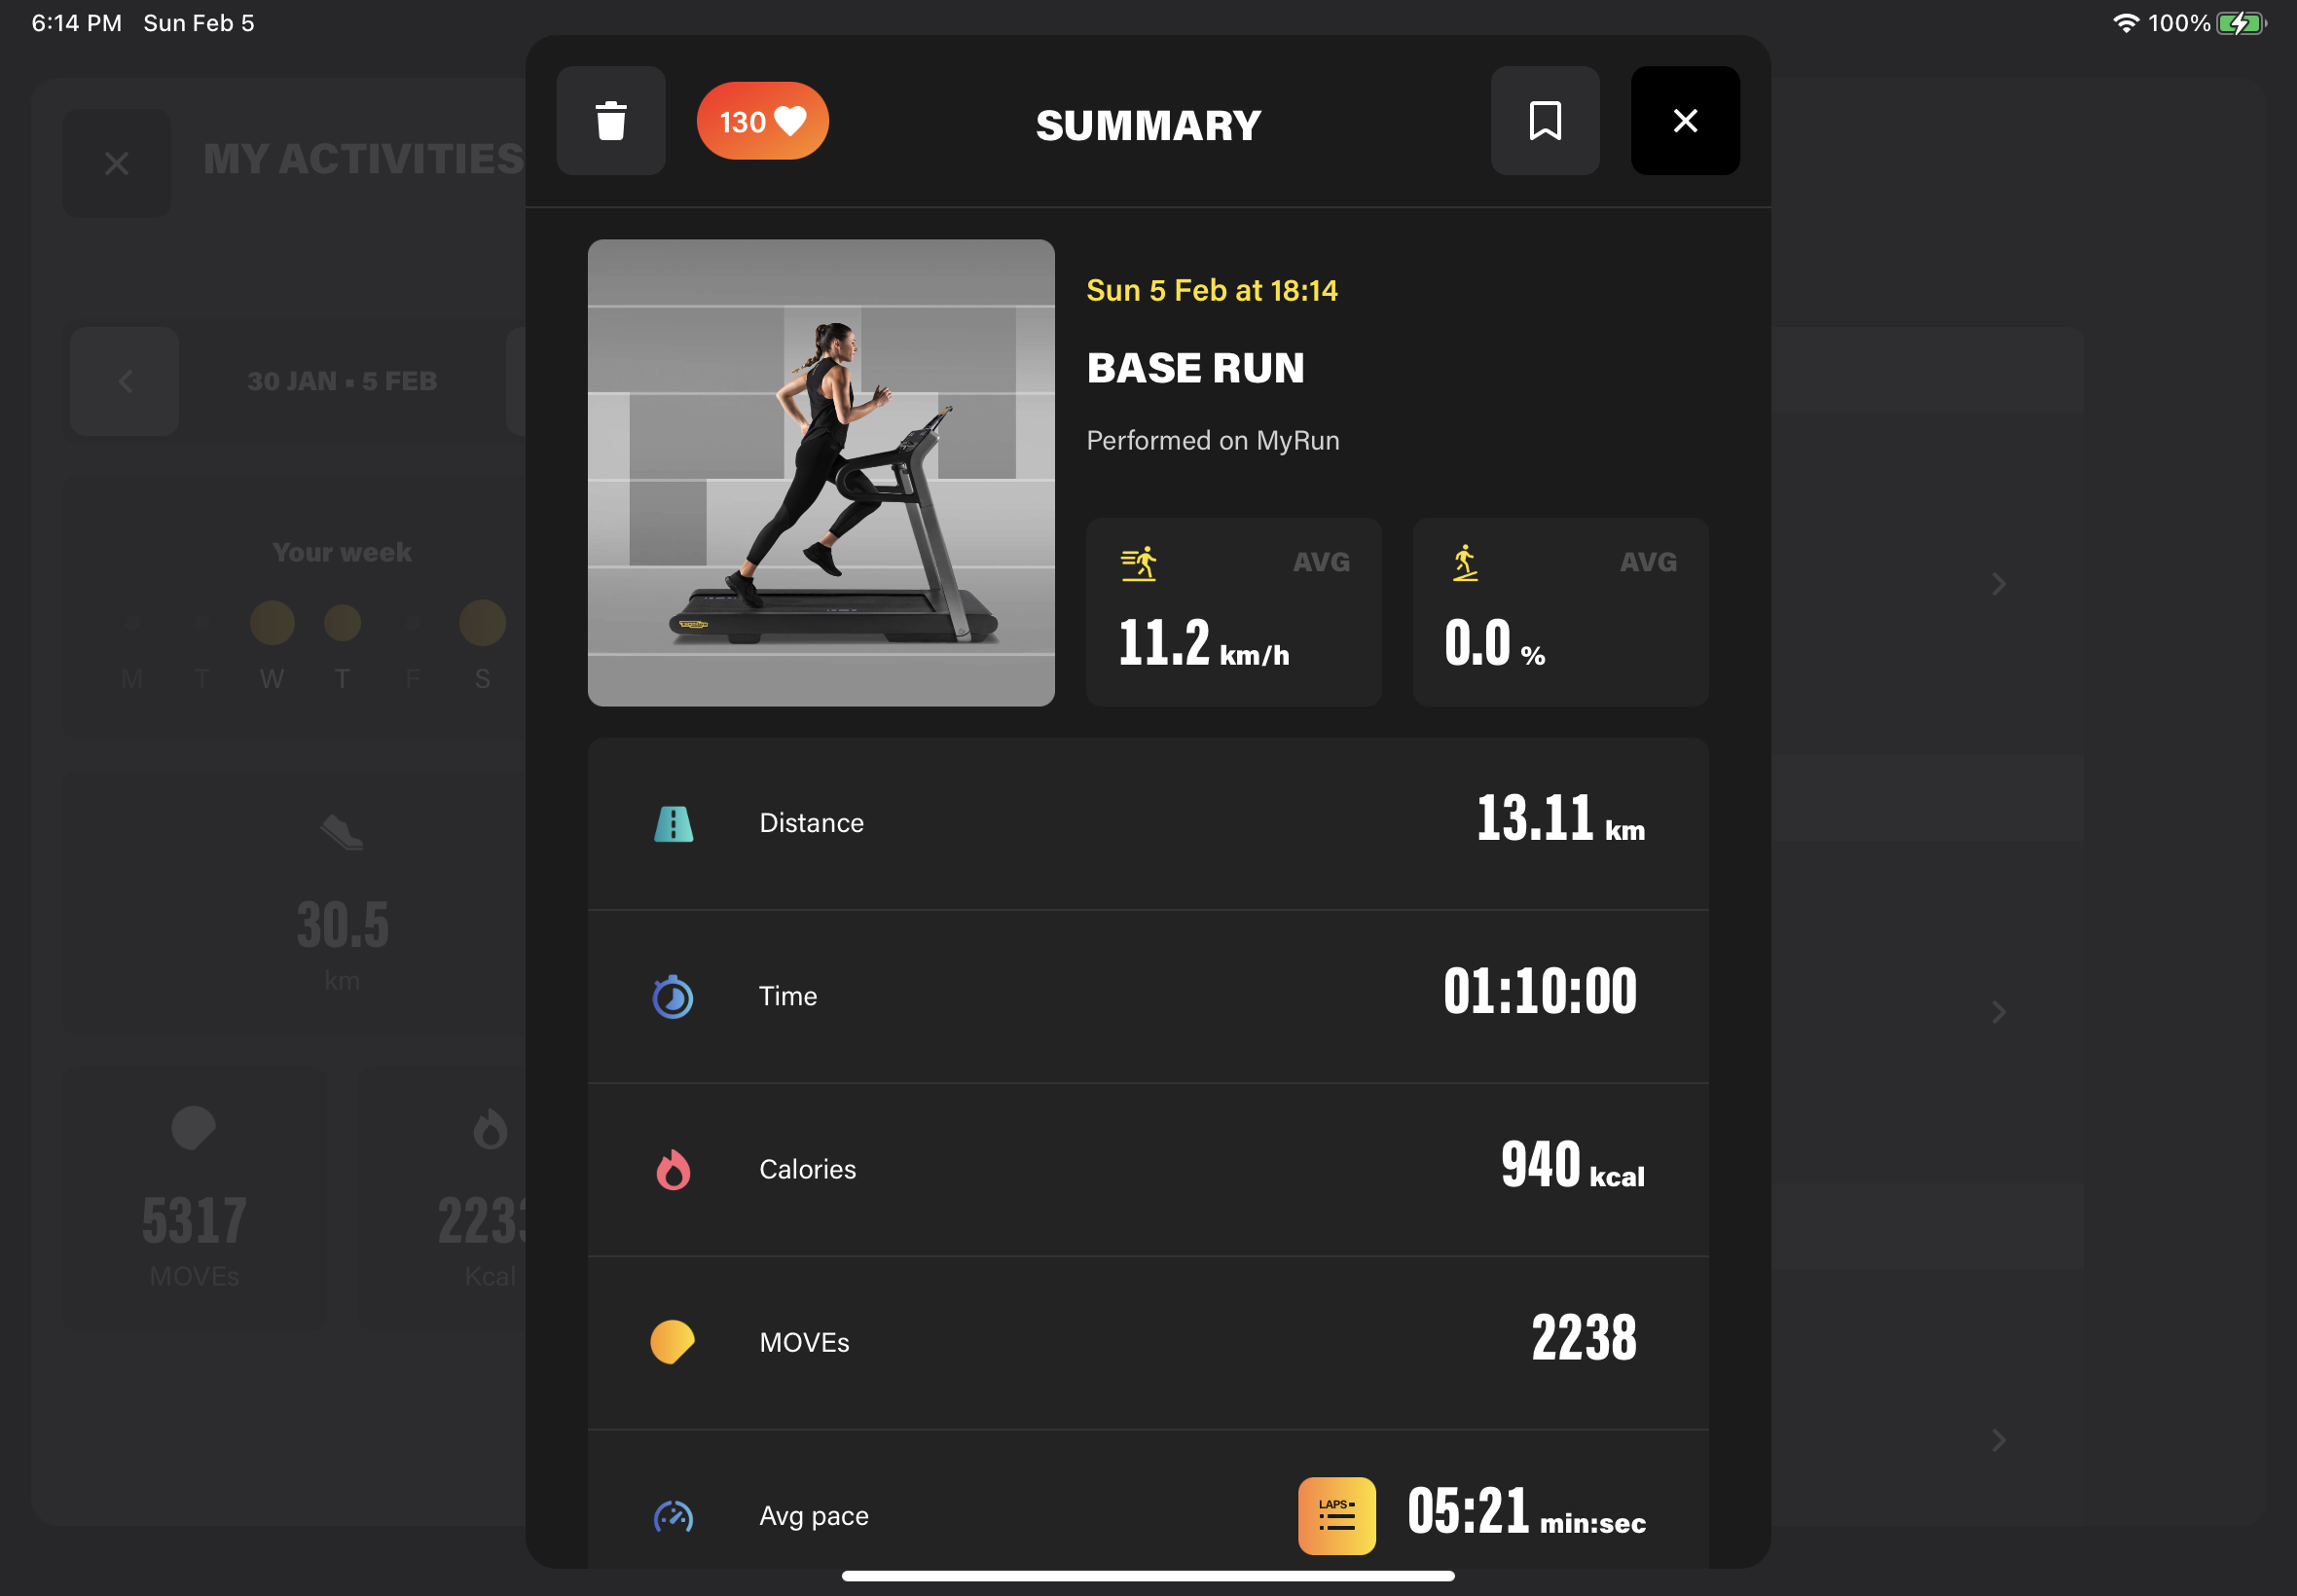 A screenshot of Technogym Live, showing a post-workout summary, with metrics for average speed and incline, distance, time, calories, MOVEs, and average page.